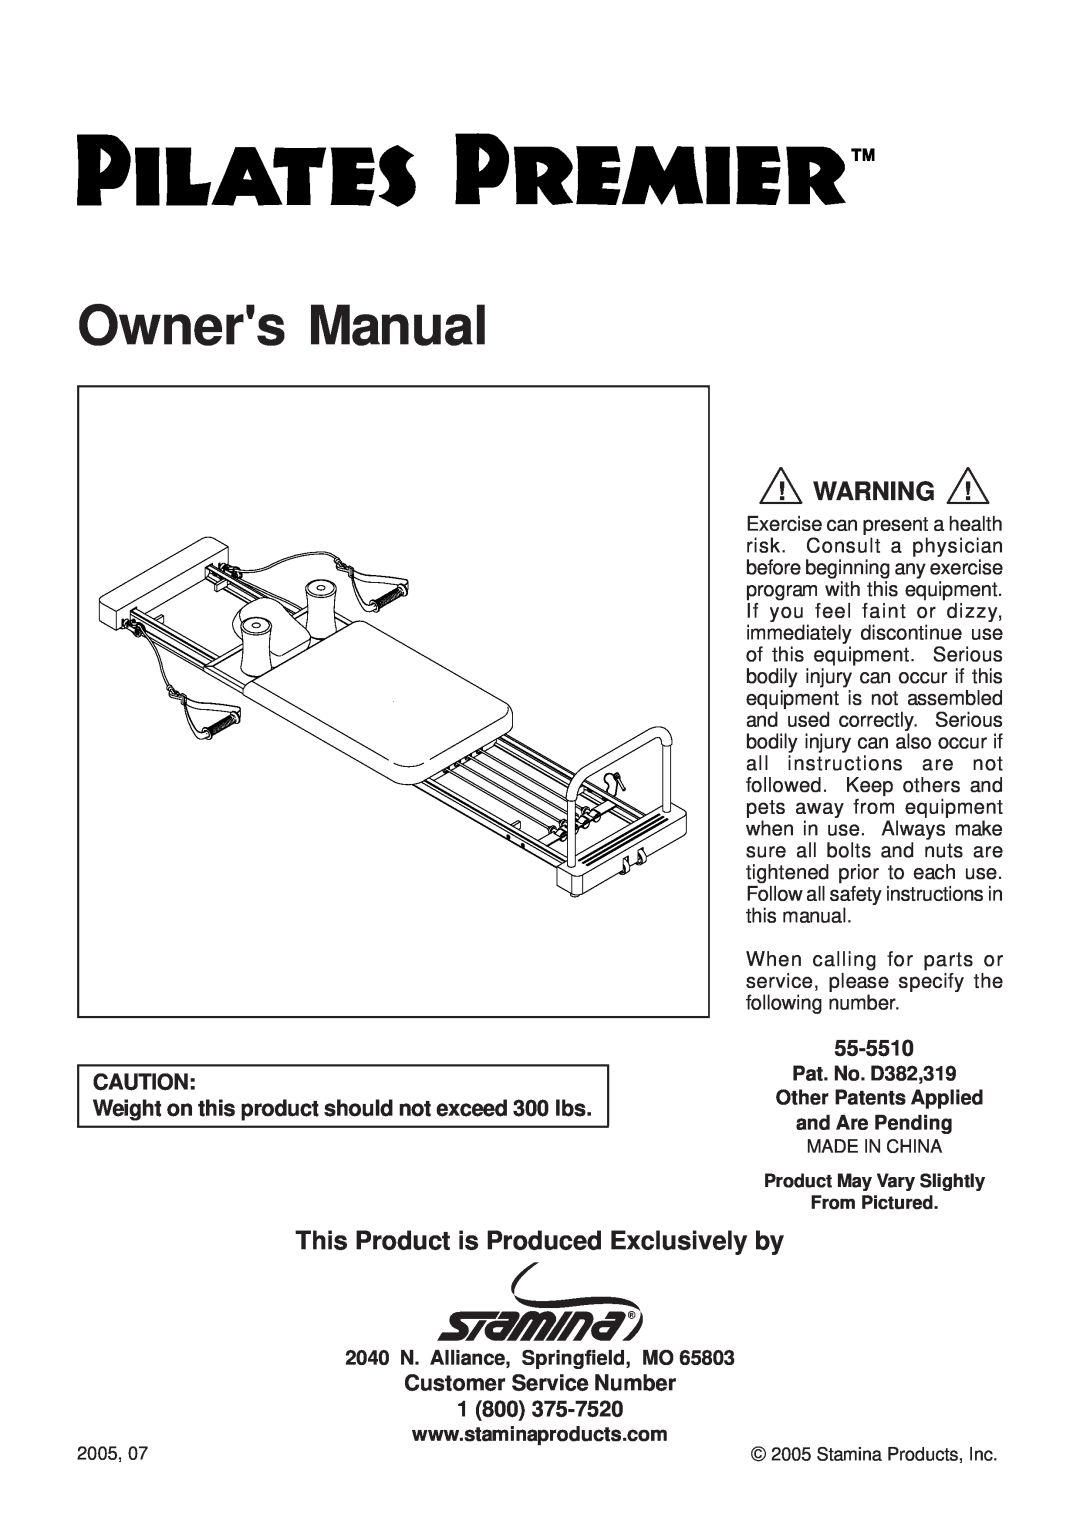 Stamina Products 55-5510 owner manual This Product is Produced Exclusively by, Owners Manual 